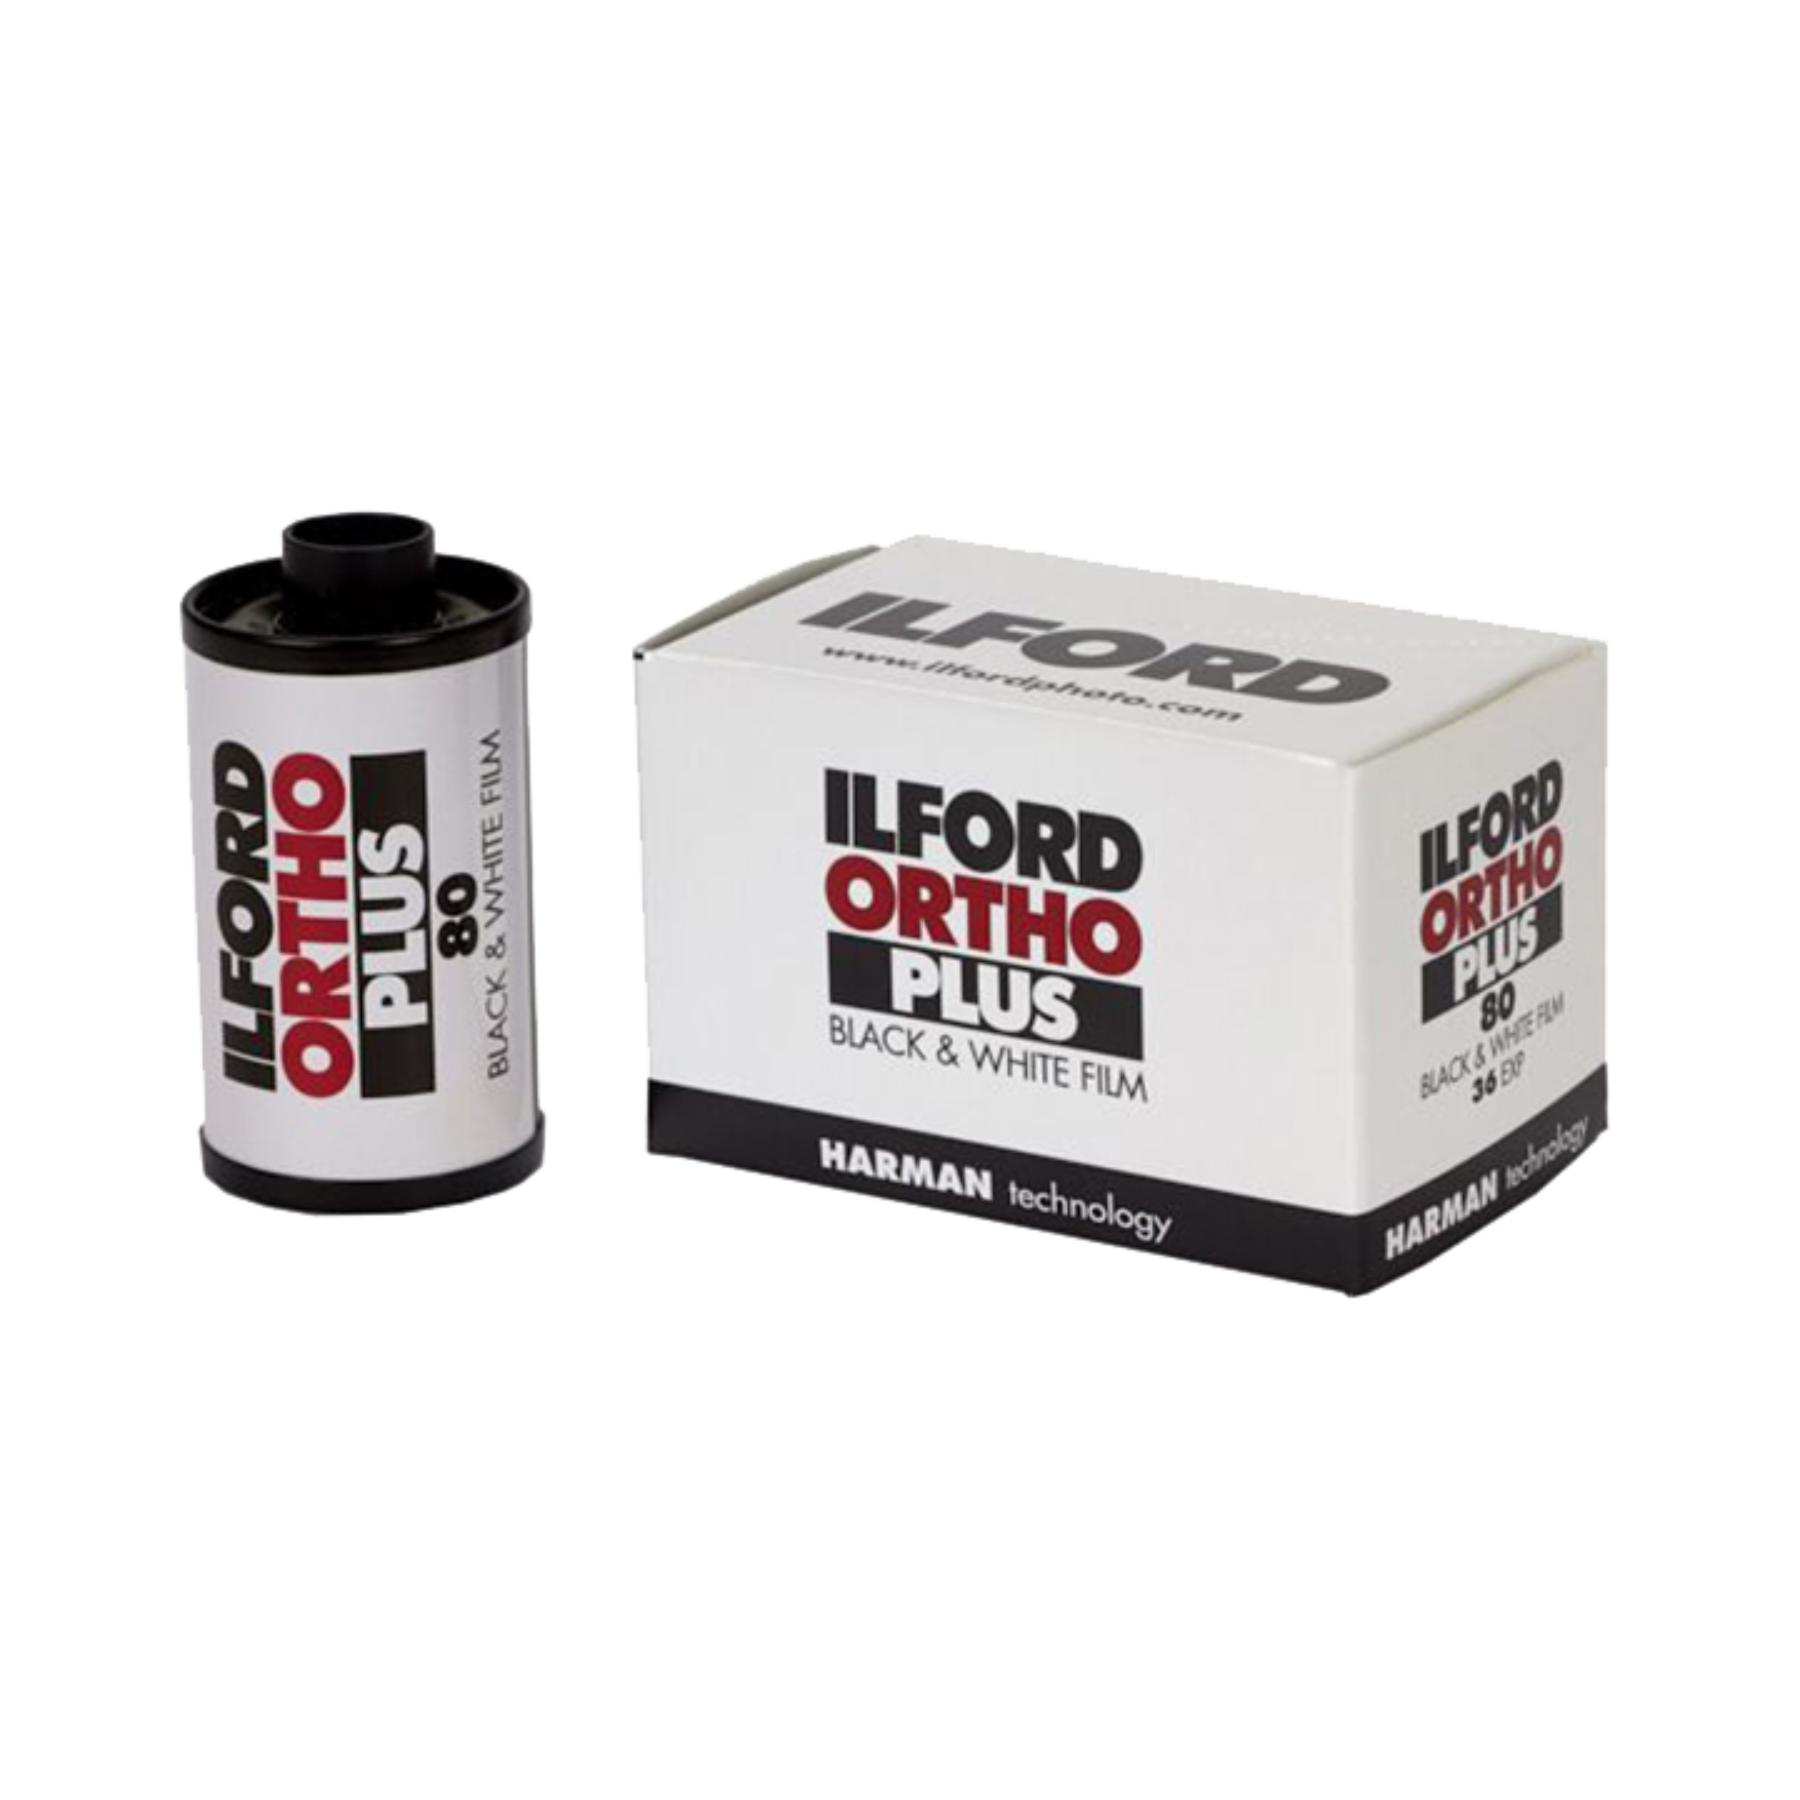 Buy Ilford Ortho Plus 35mm 36 Exposure Black & White Film at Topic Store